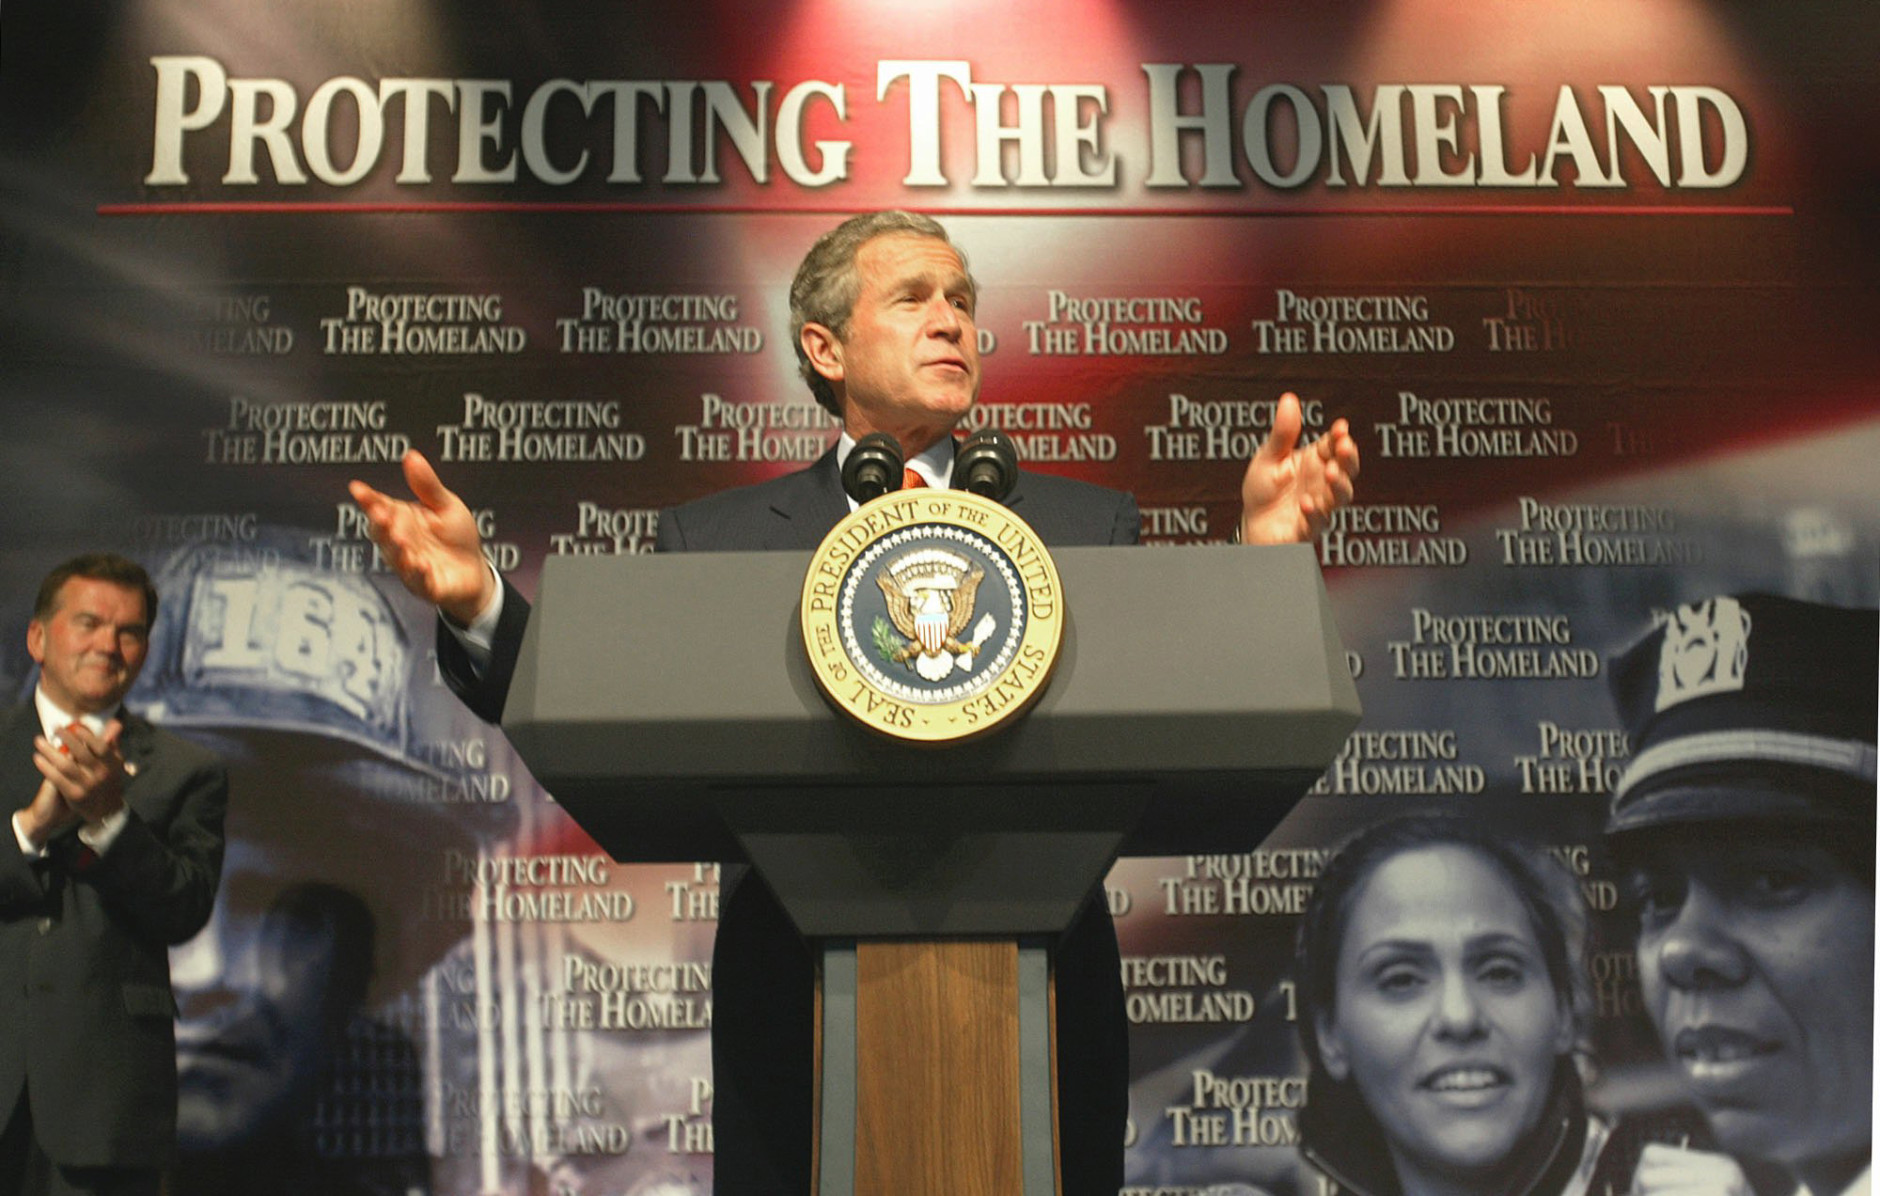 ** FILE ** President Bush makes remarks on Homeland Security at Oak Park High School in Kansas City, Mo., in this June 11, 2002 file photo. The name of the Department of Homeland Security is meant to evoke images of safety, even family, hearth, comfort. It gives some people a knot in the stomach. An uncommon word to begin with, "homeland" became an everyday word after the Sept. 11 attacks and was institutionalized when President Bush created the Office of Homeland Security. (AP Photo/Ron Edmonds, File)